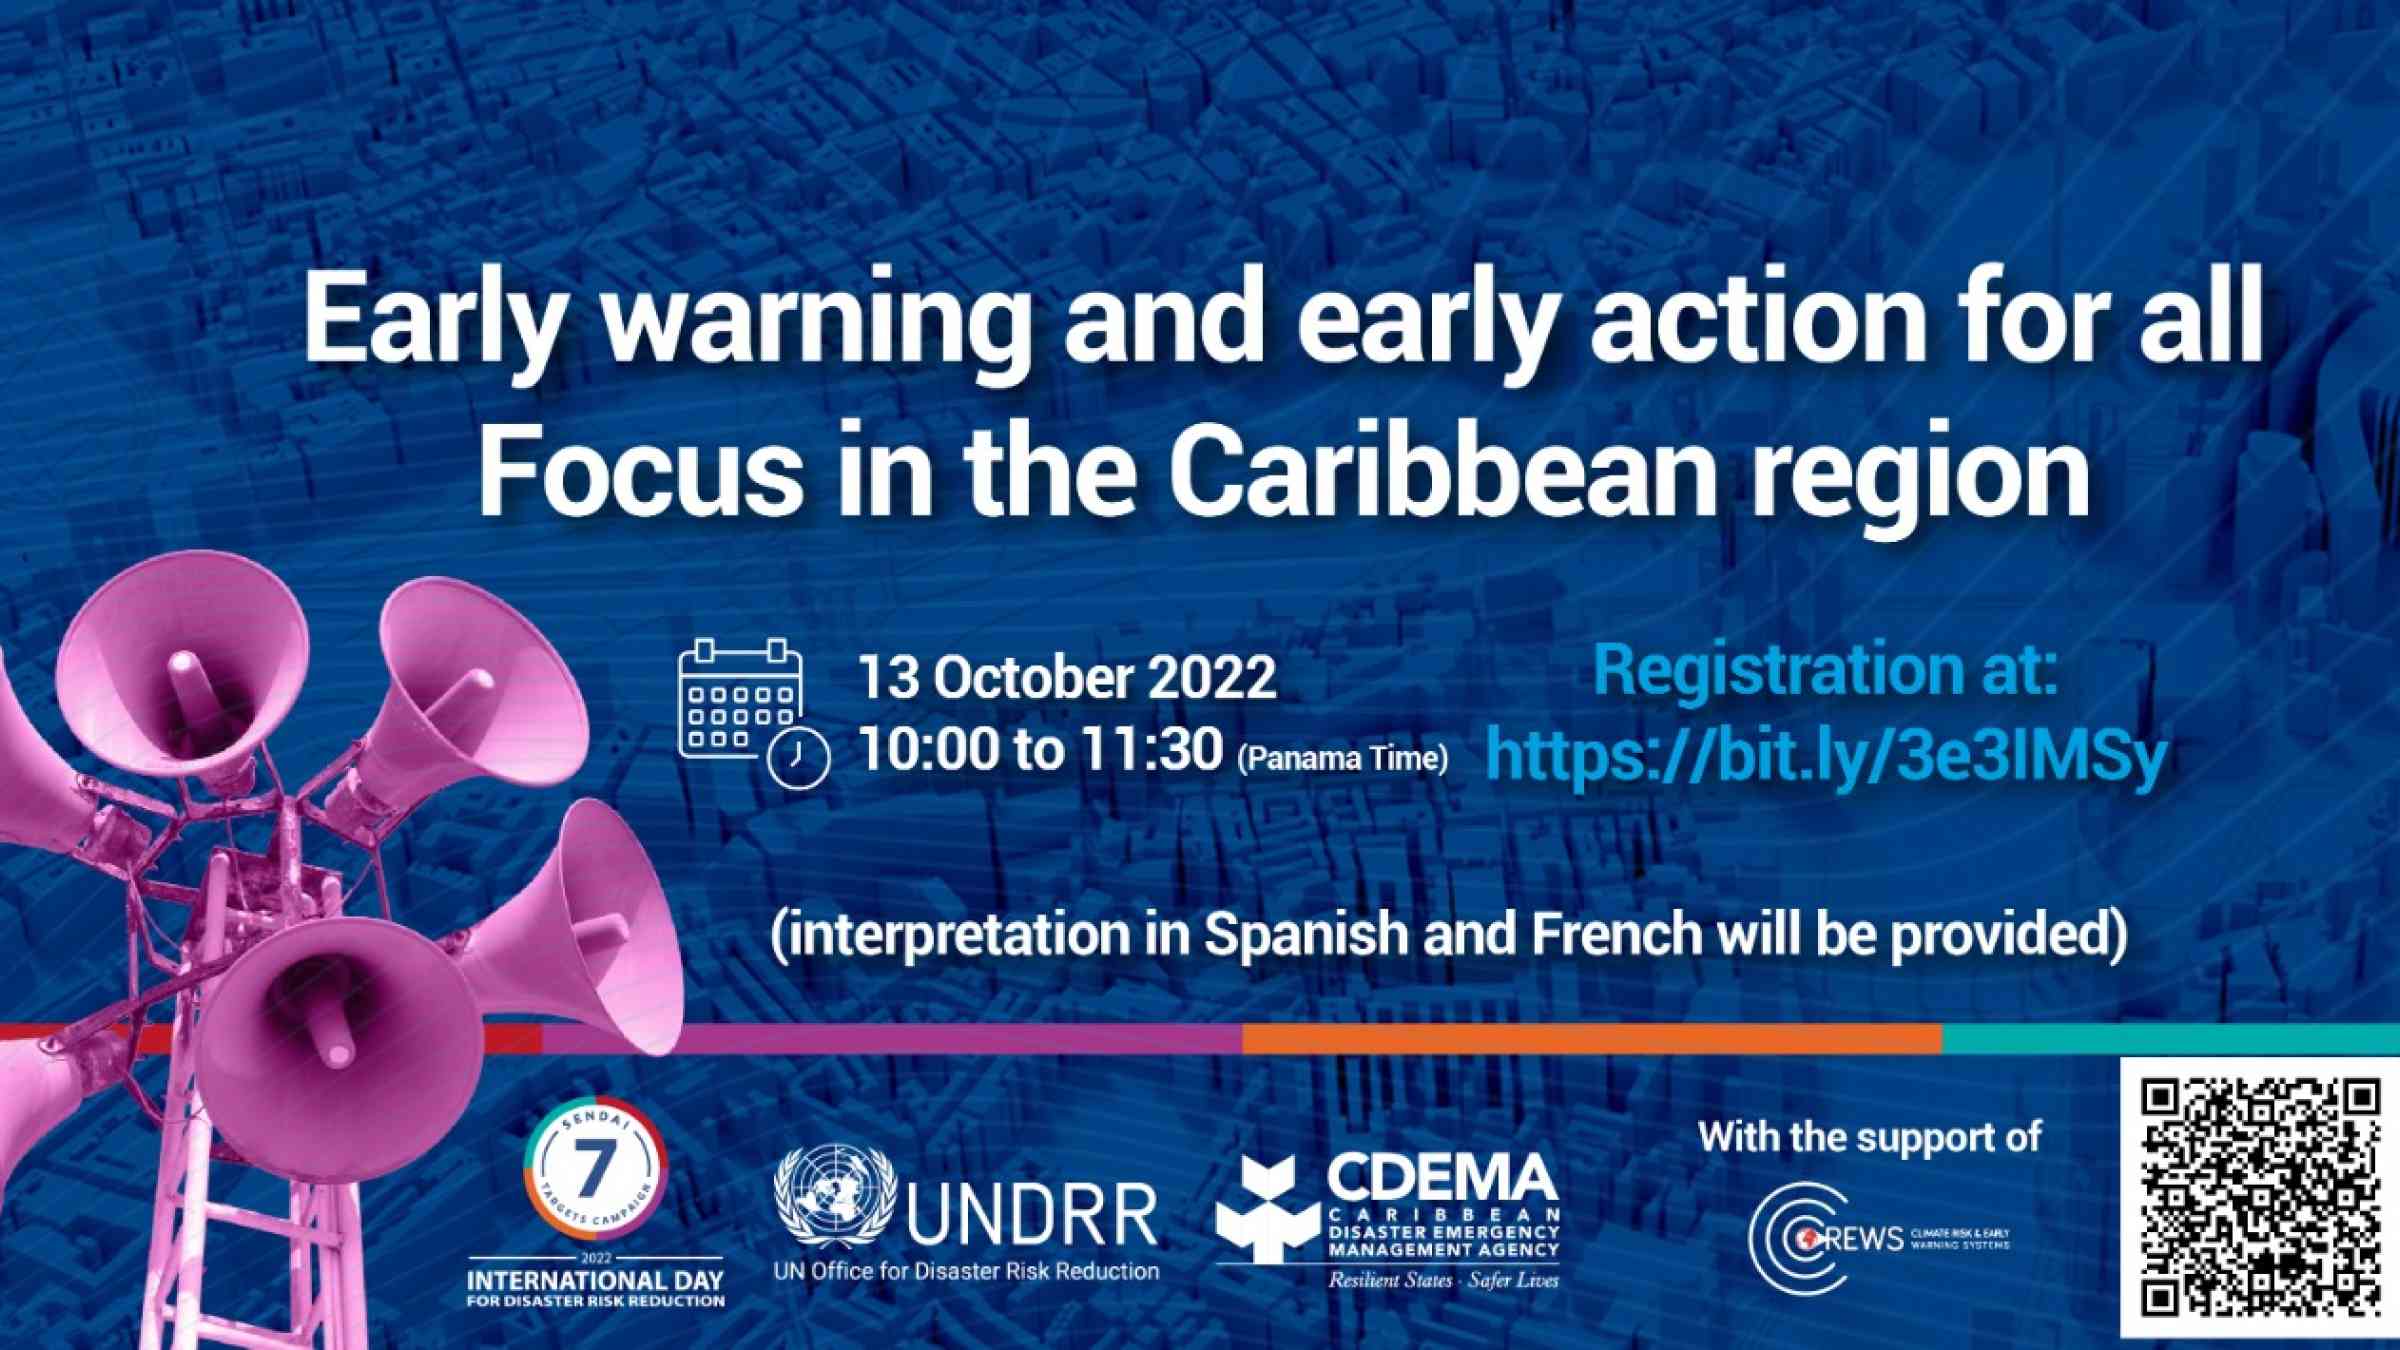 Early warning and early action for all - Focus in the Caribbean region